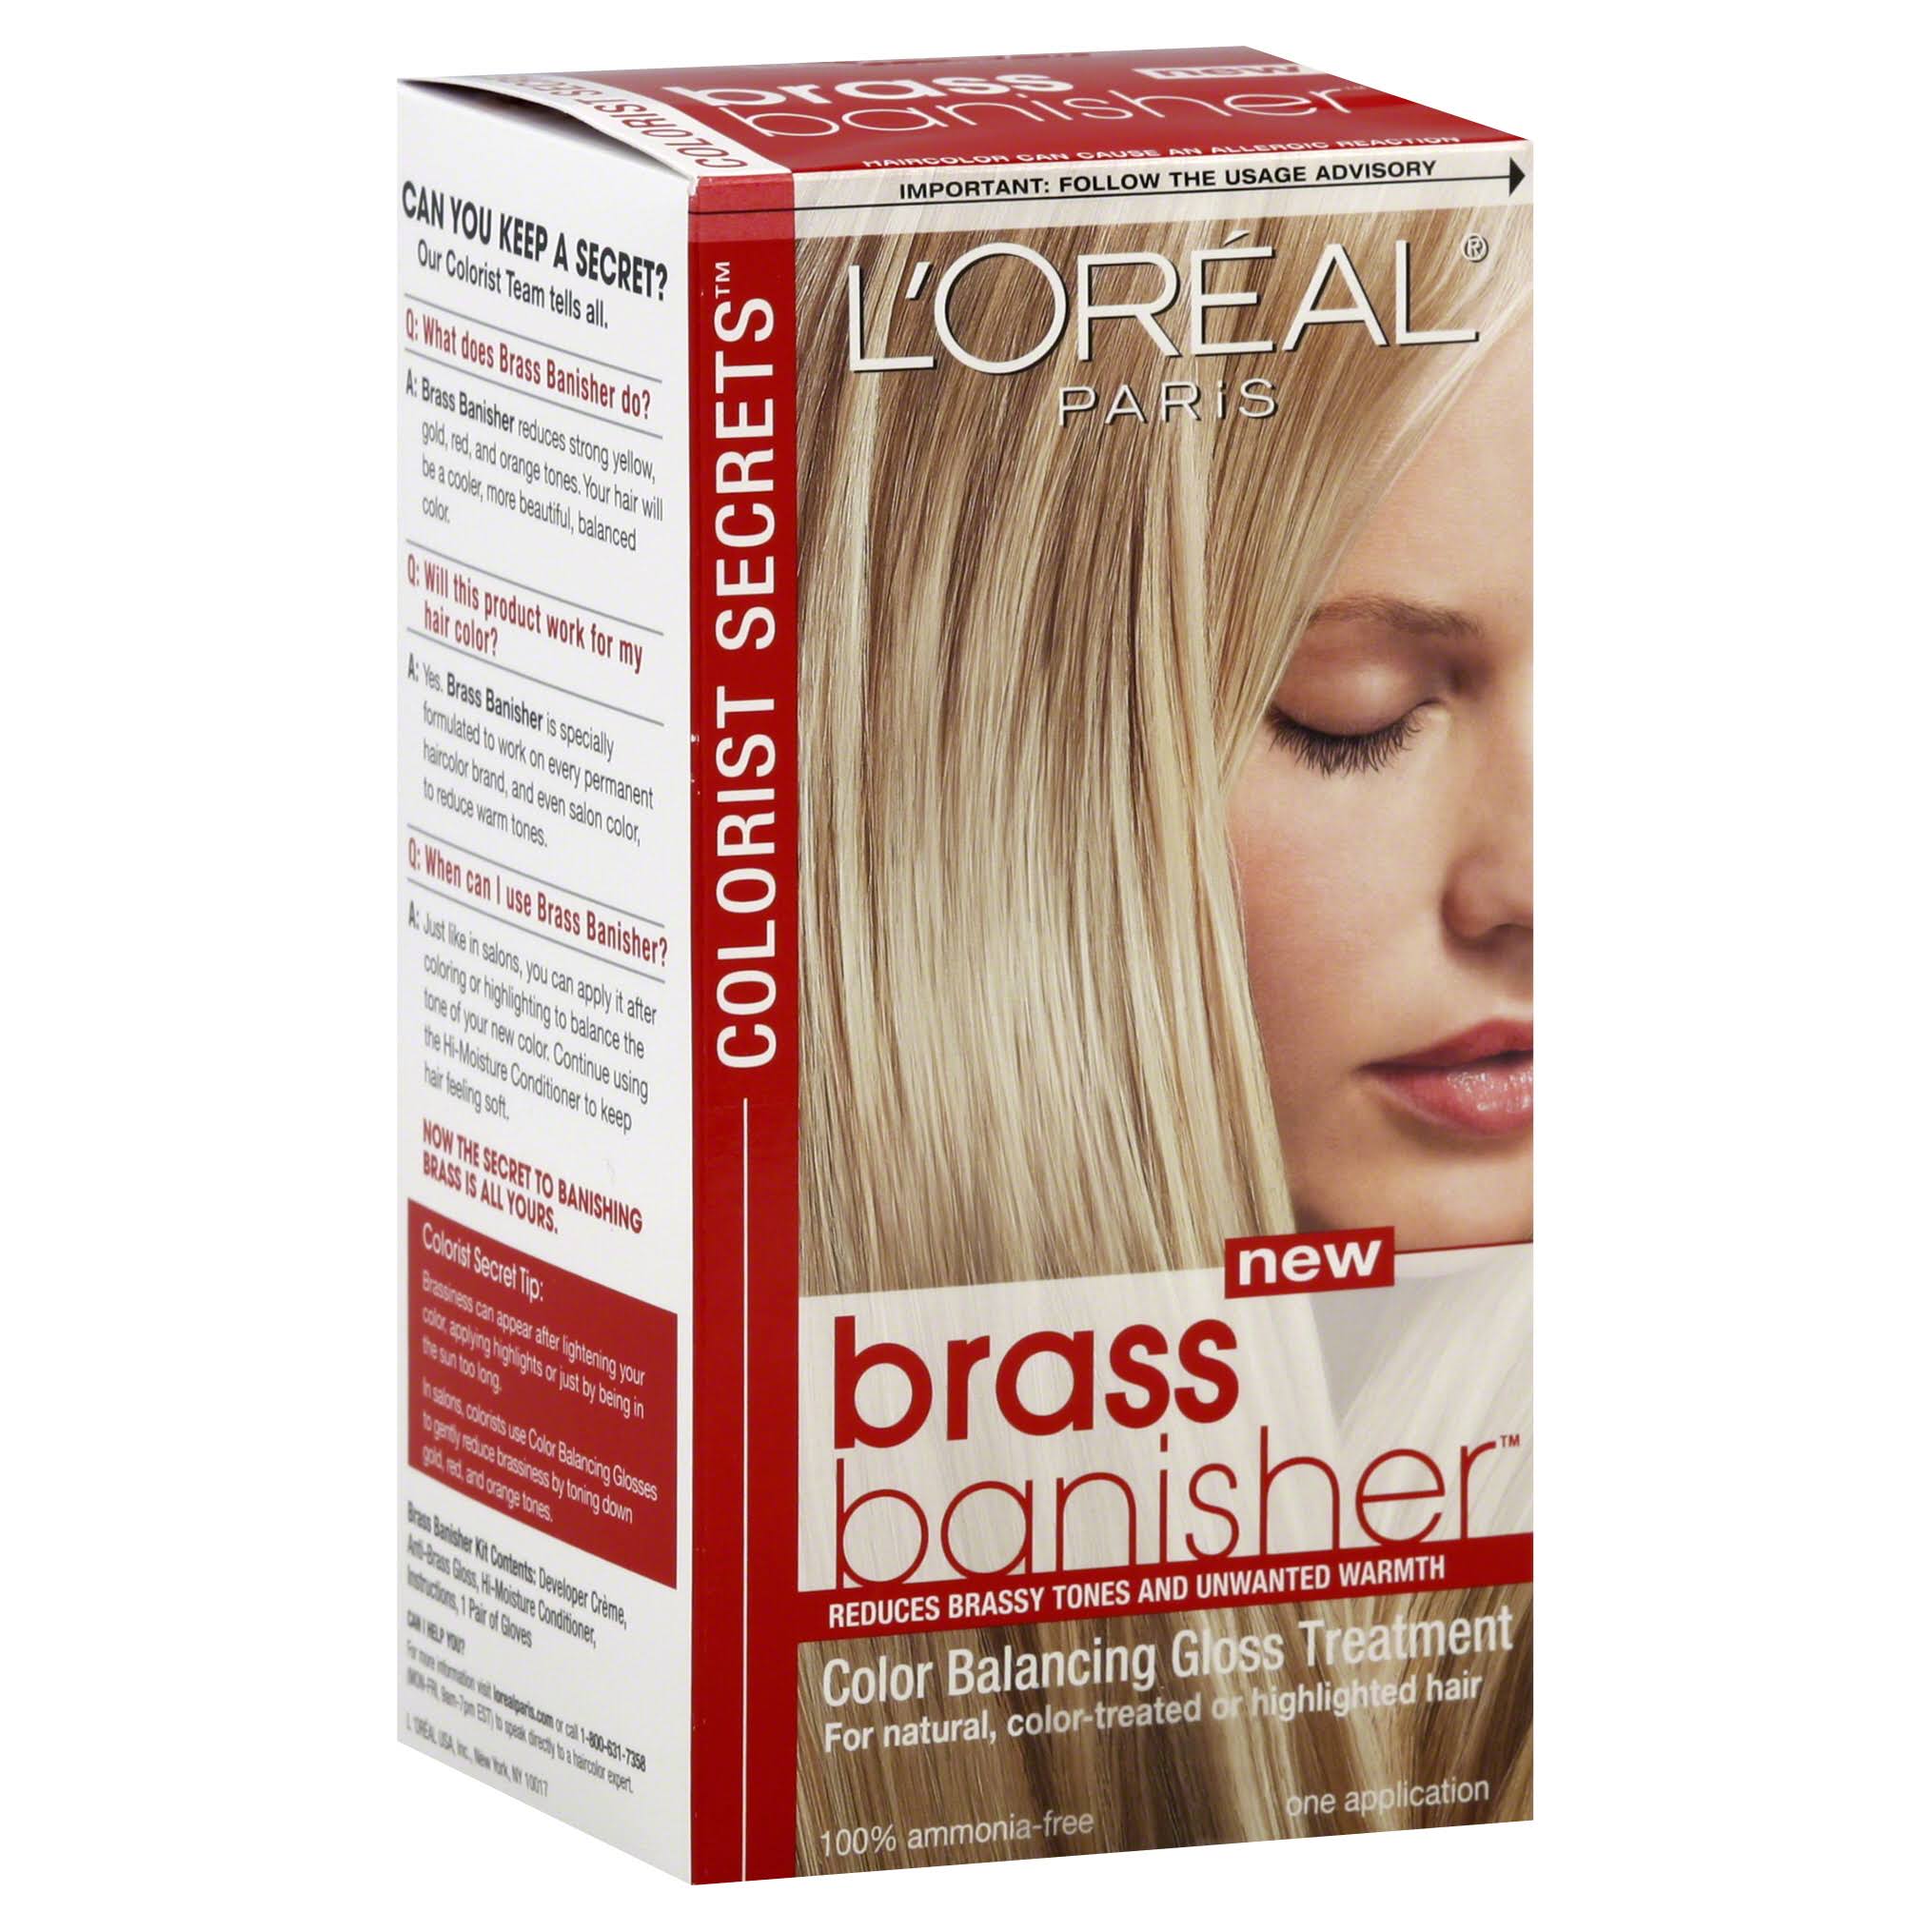 L'oreal Paris Brass Banisher Hair Color - 1 application